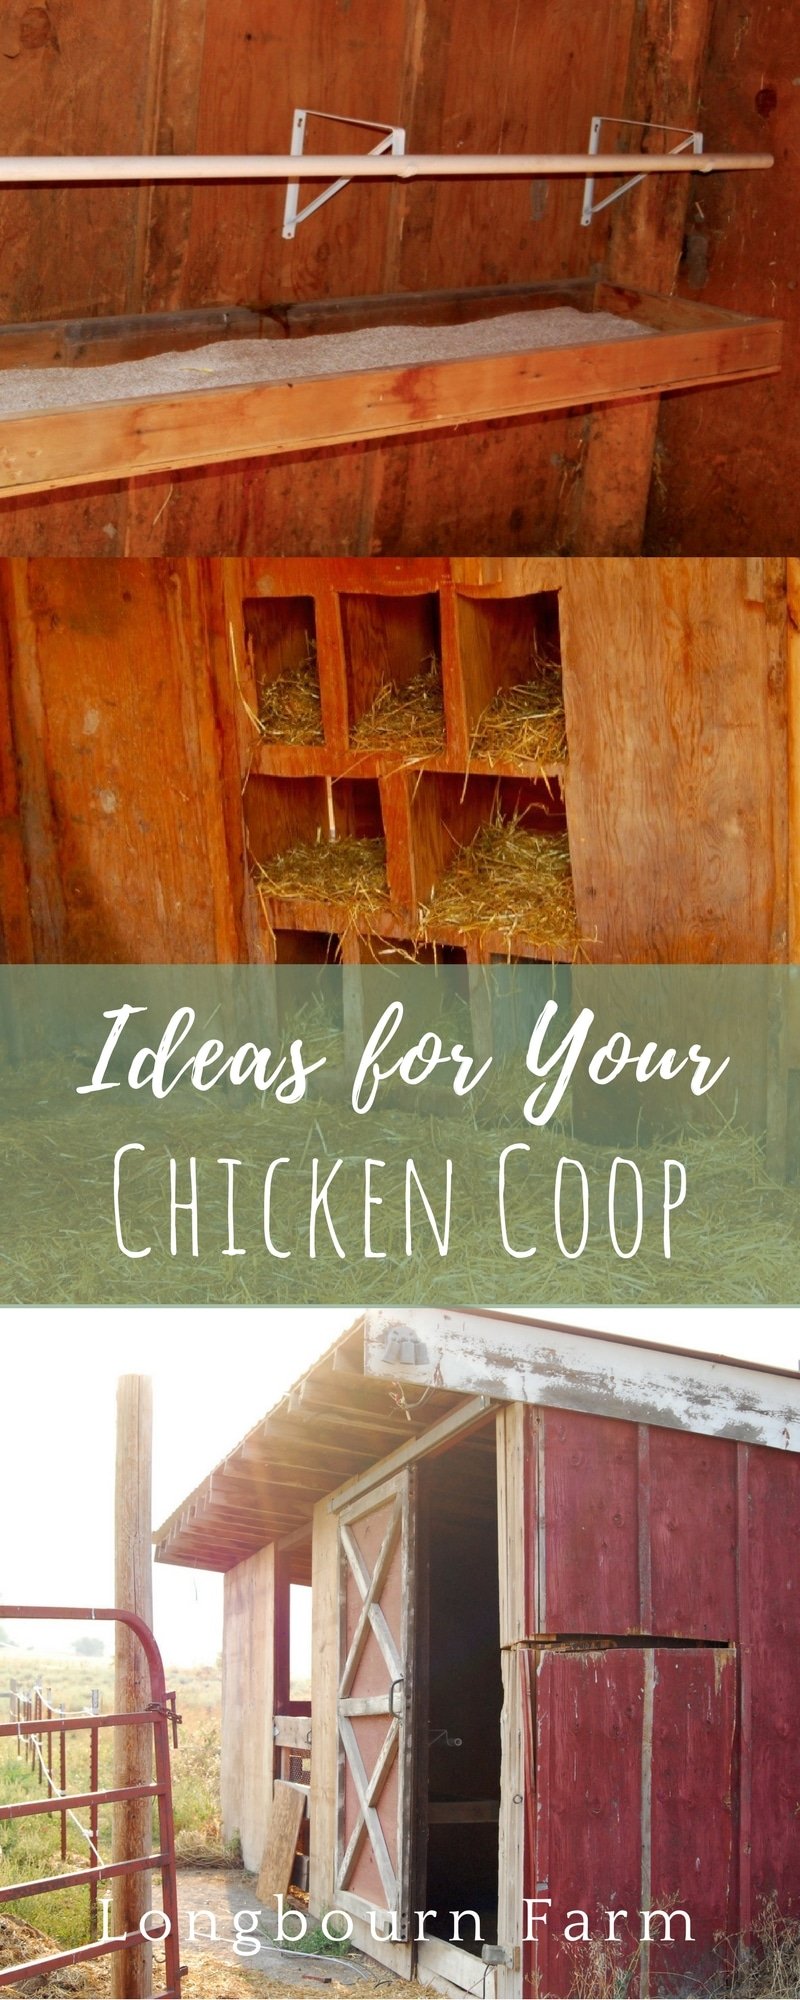 Our chicken coop is complete! We turned a couple of old stalls from a barn that we demolished into an awesome coop and run. See how we did it and get some awesome chicken coop ideas for your own place!